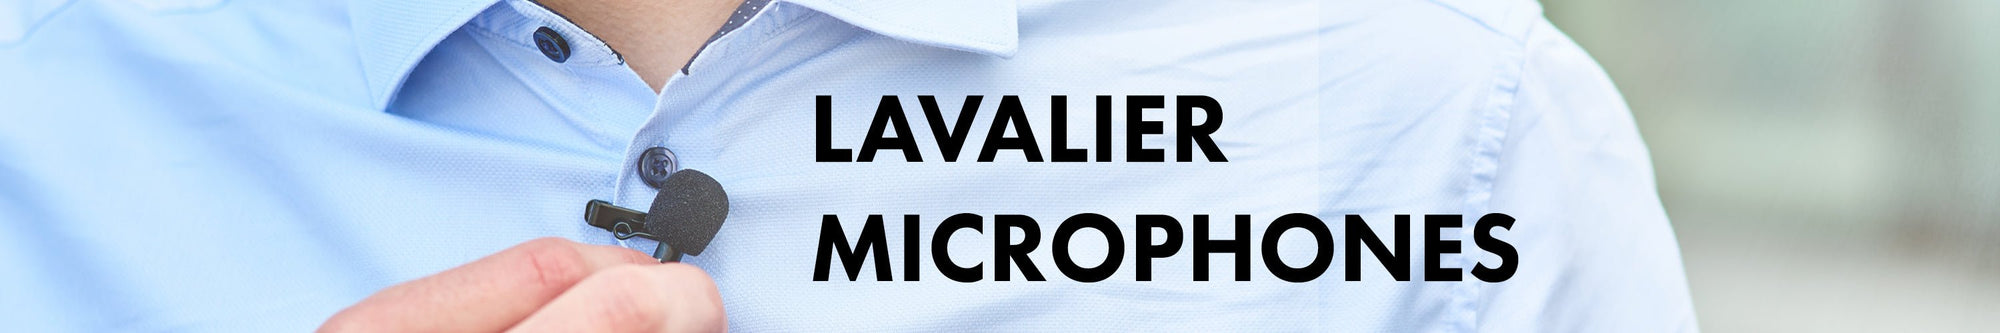 Wired & Wireless Lavalier Microphone Systems - Movo